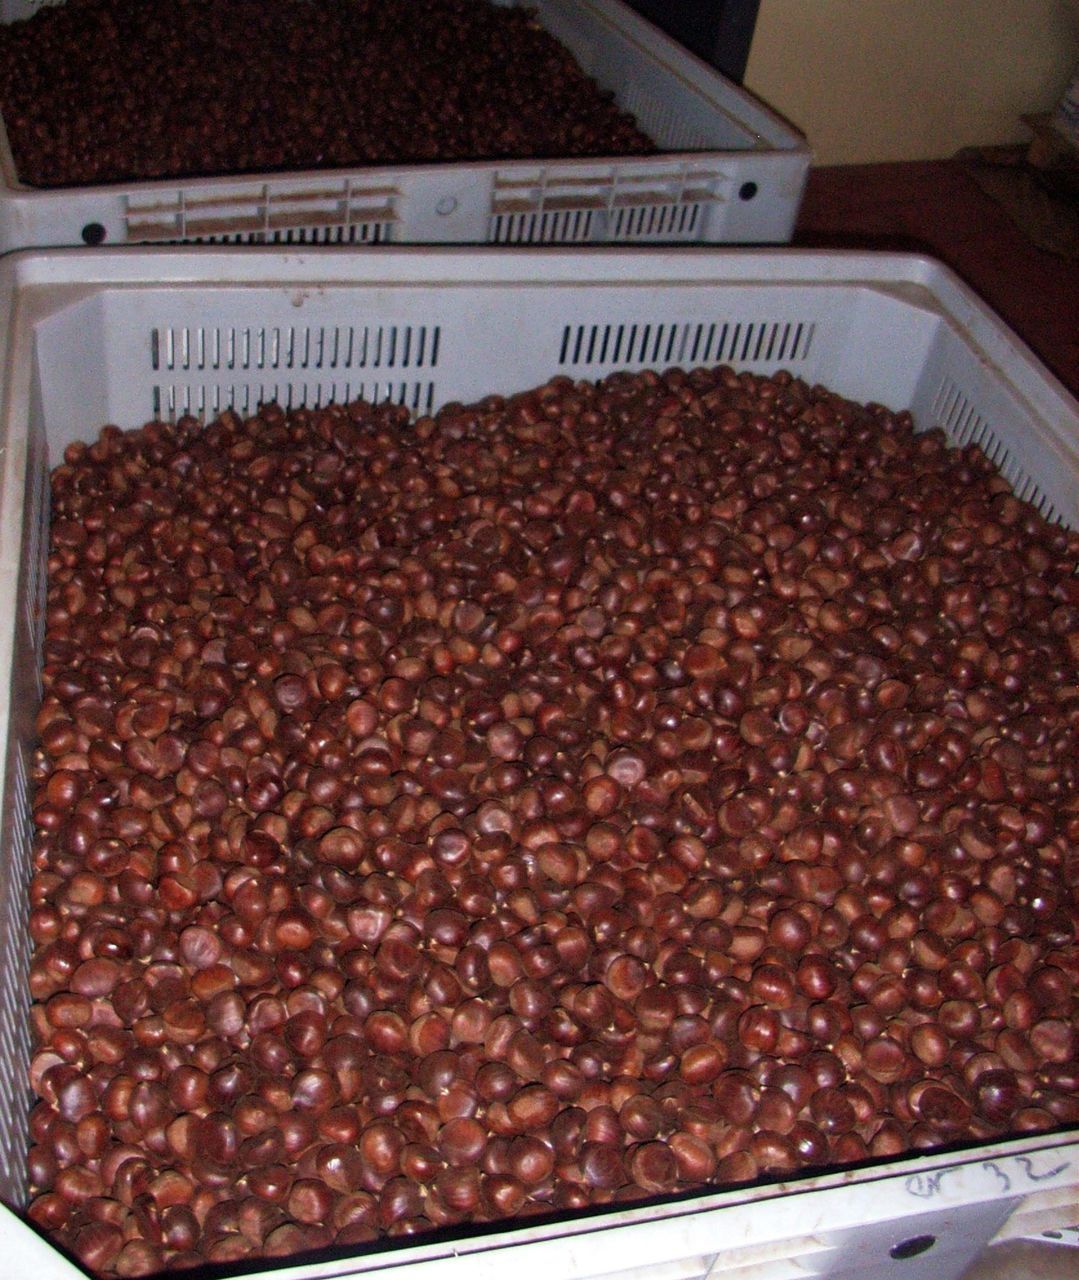 HIGH ANGLE VIEW OF ROASTED COFFEE BEANS IN MARKET